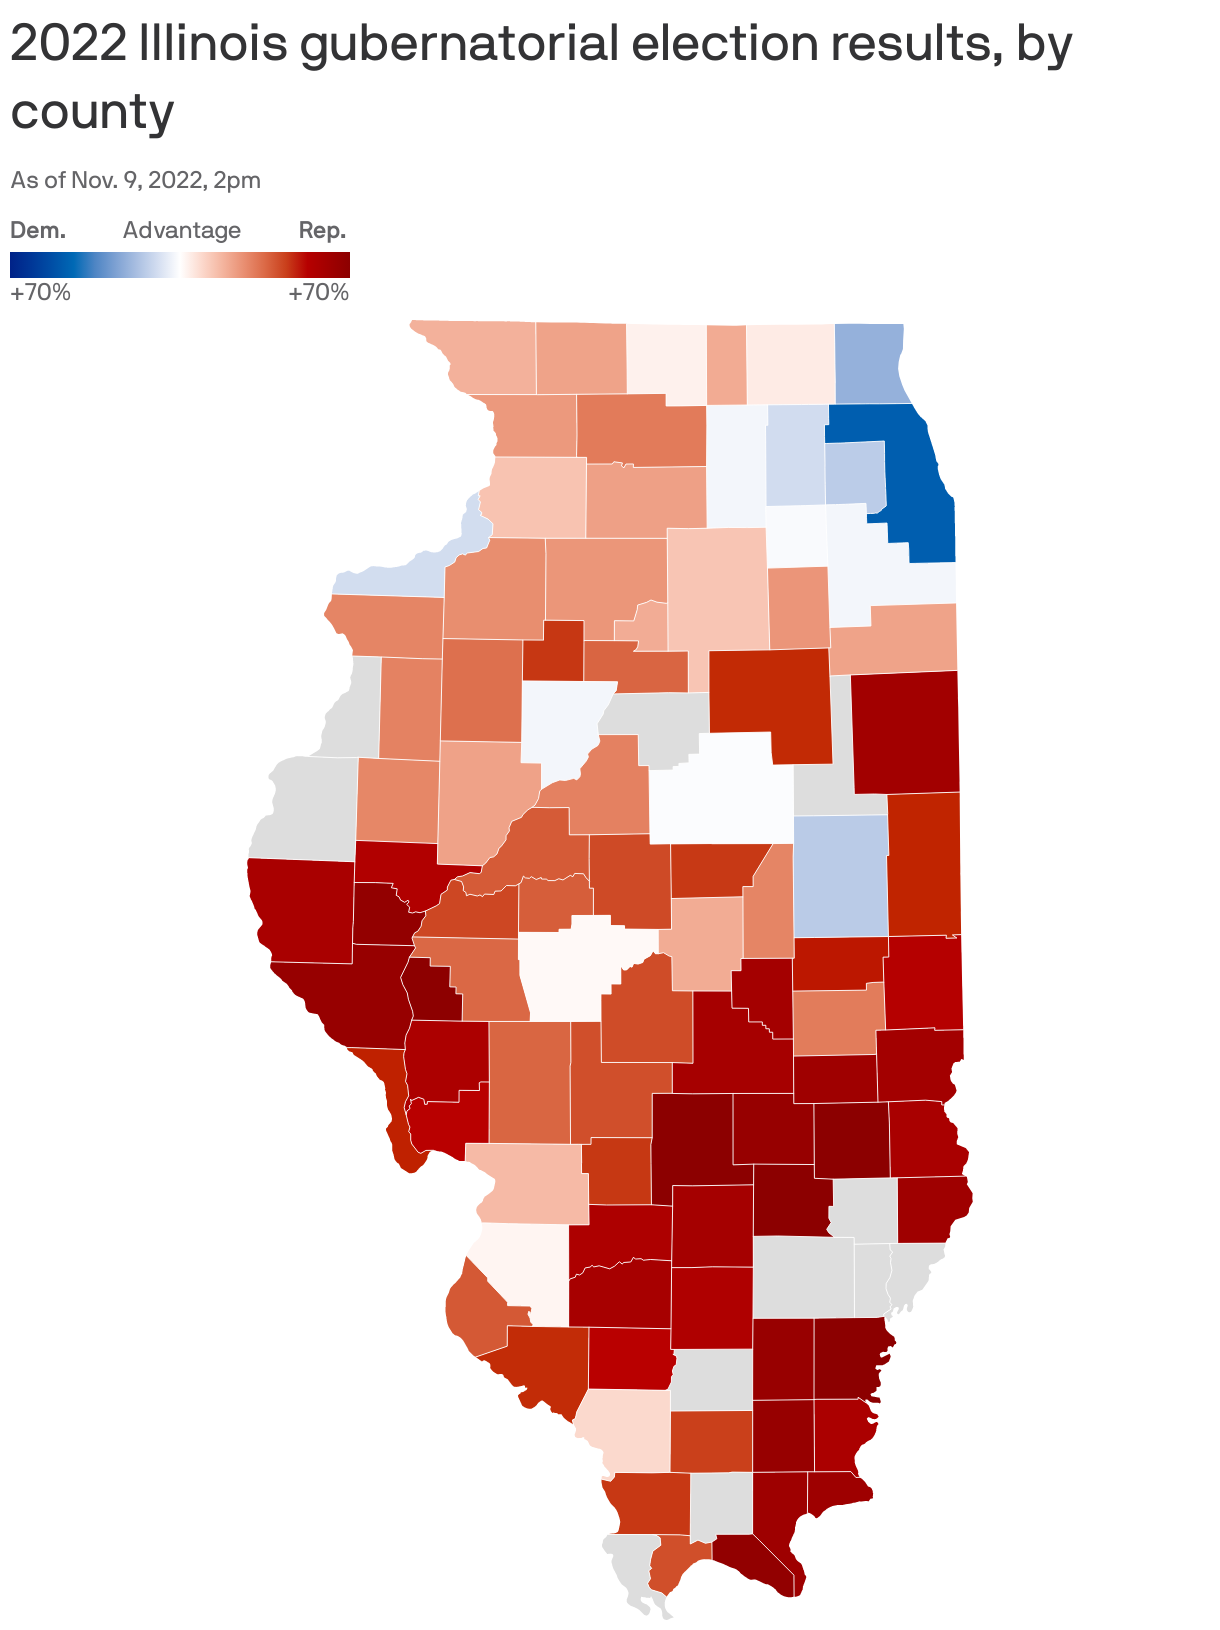 2022 Illinois gubernatorial election results, by county